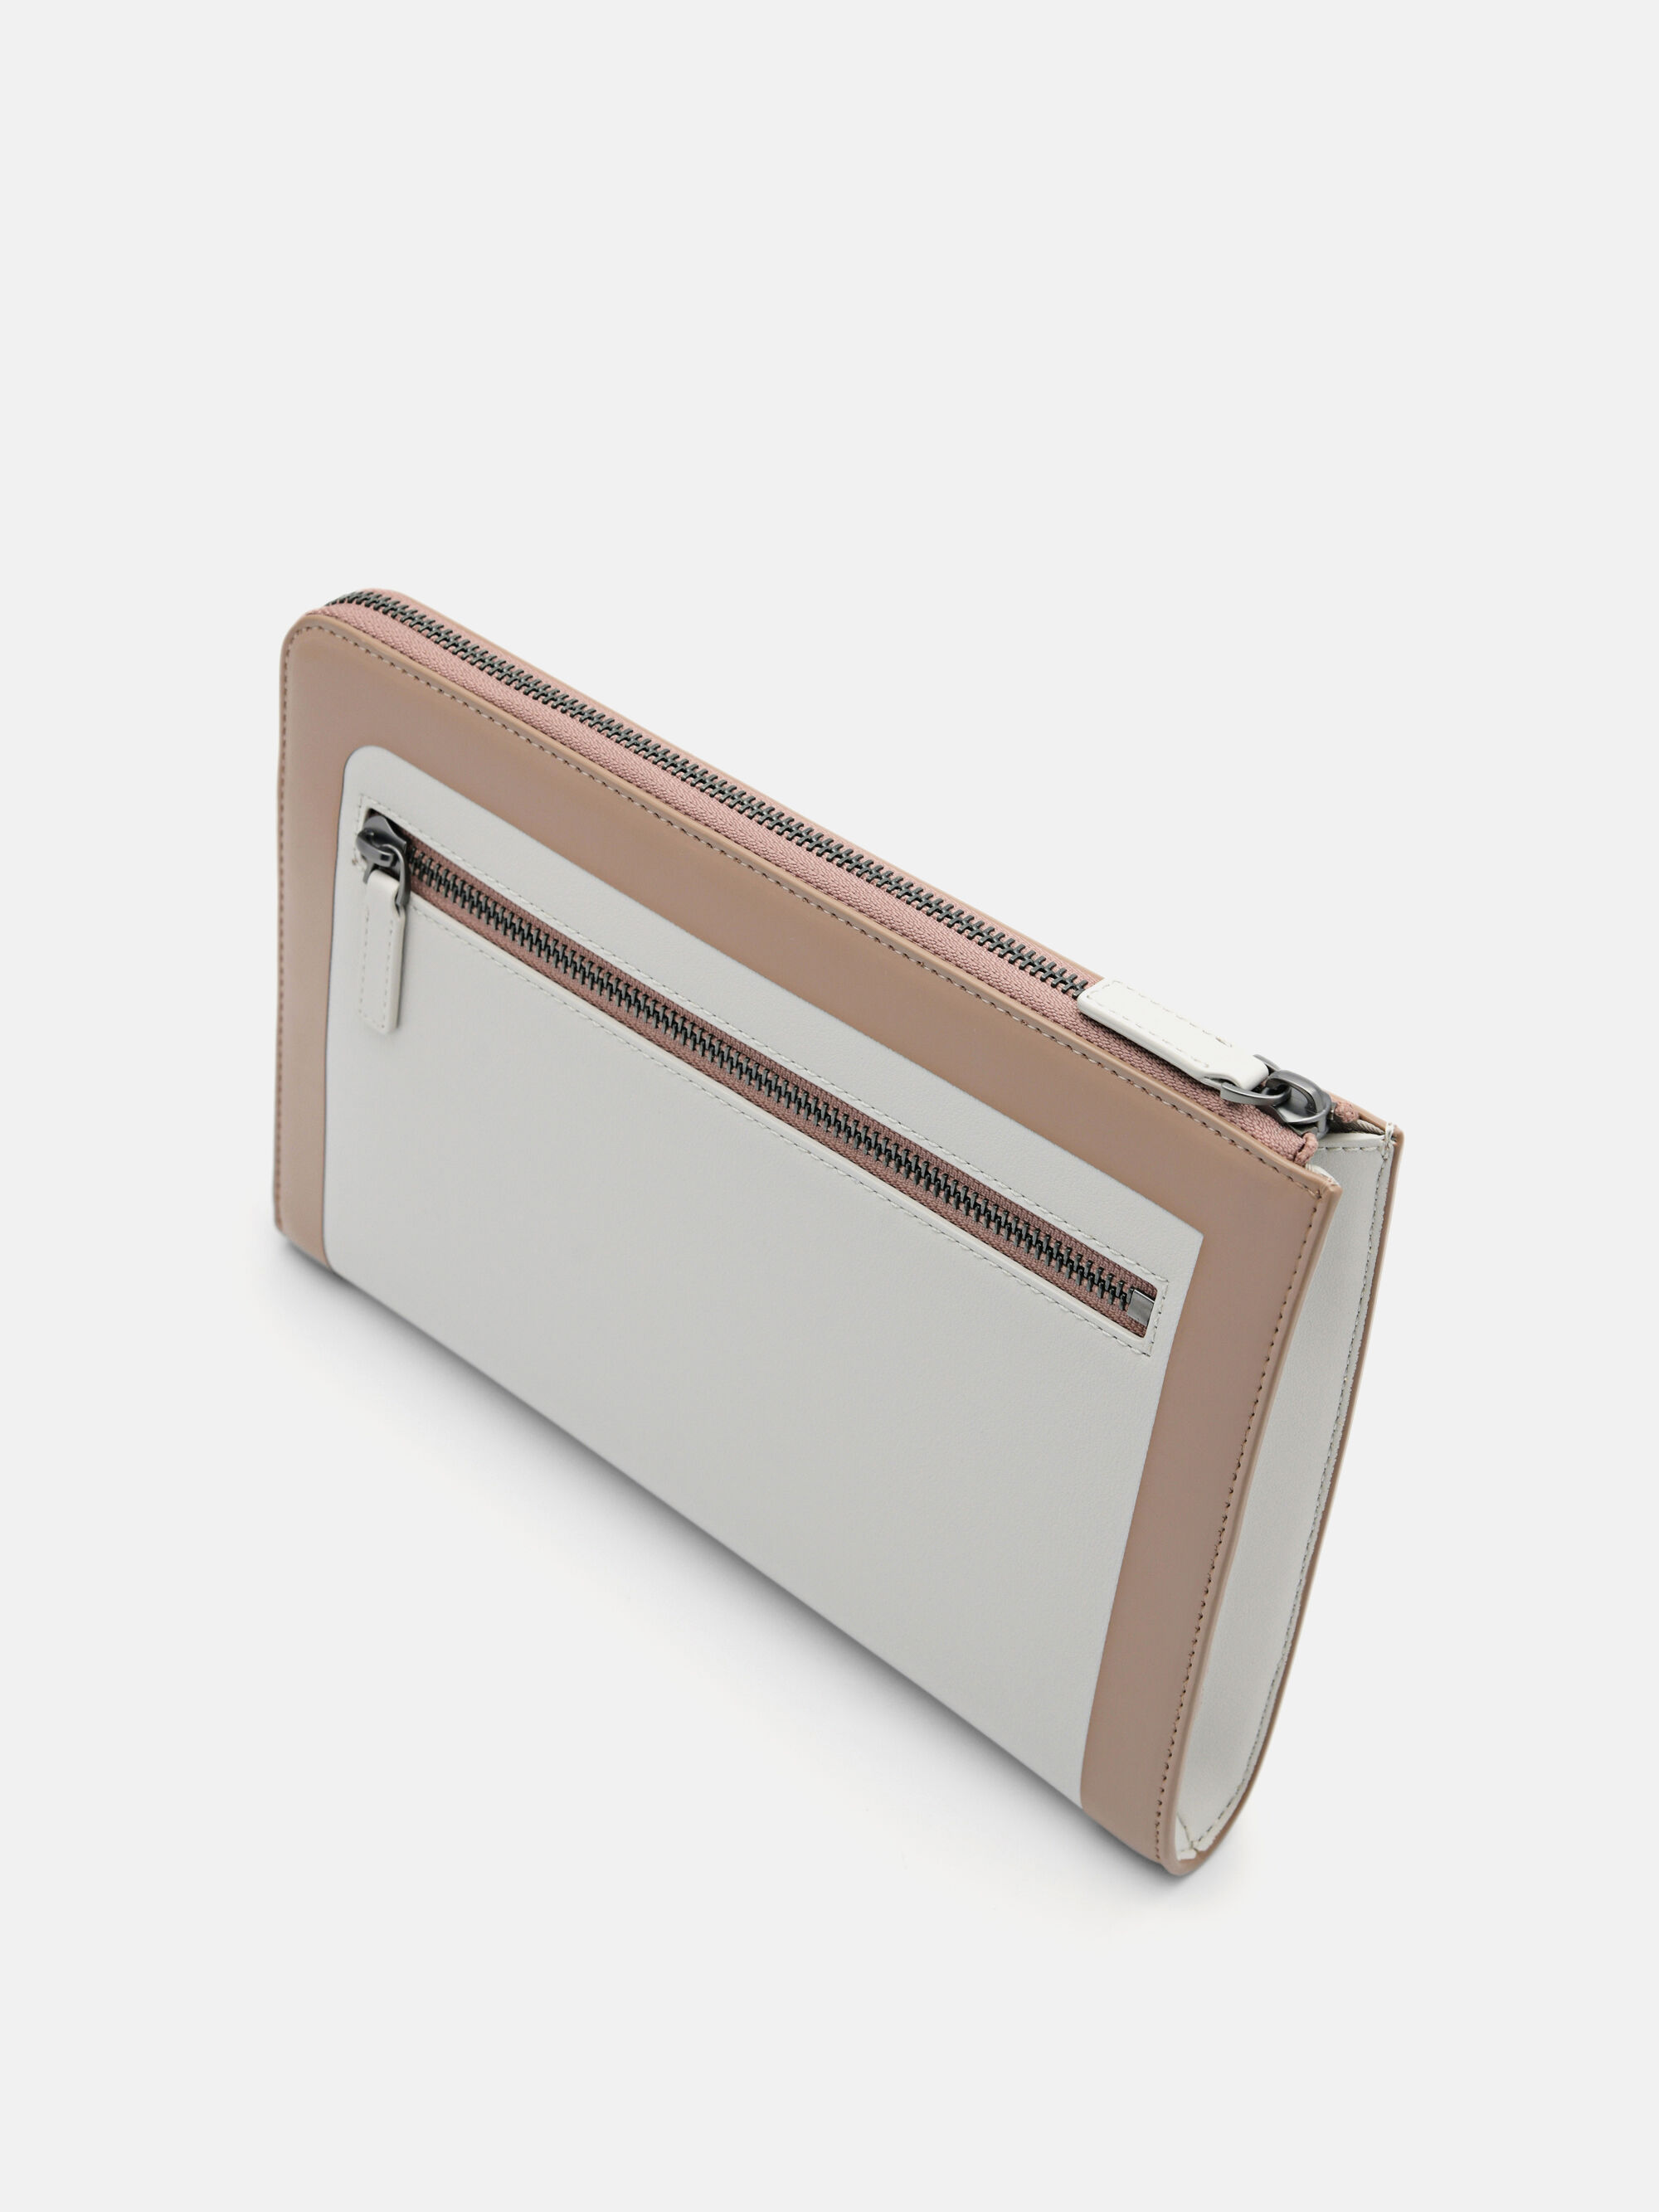 Clutch Bag, Taupe